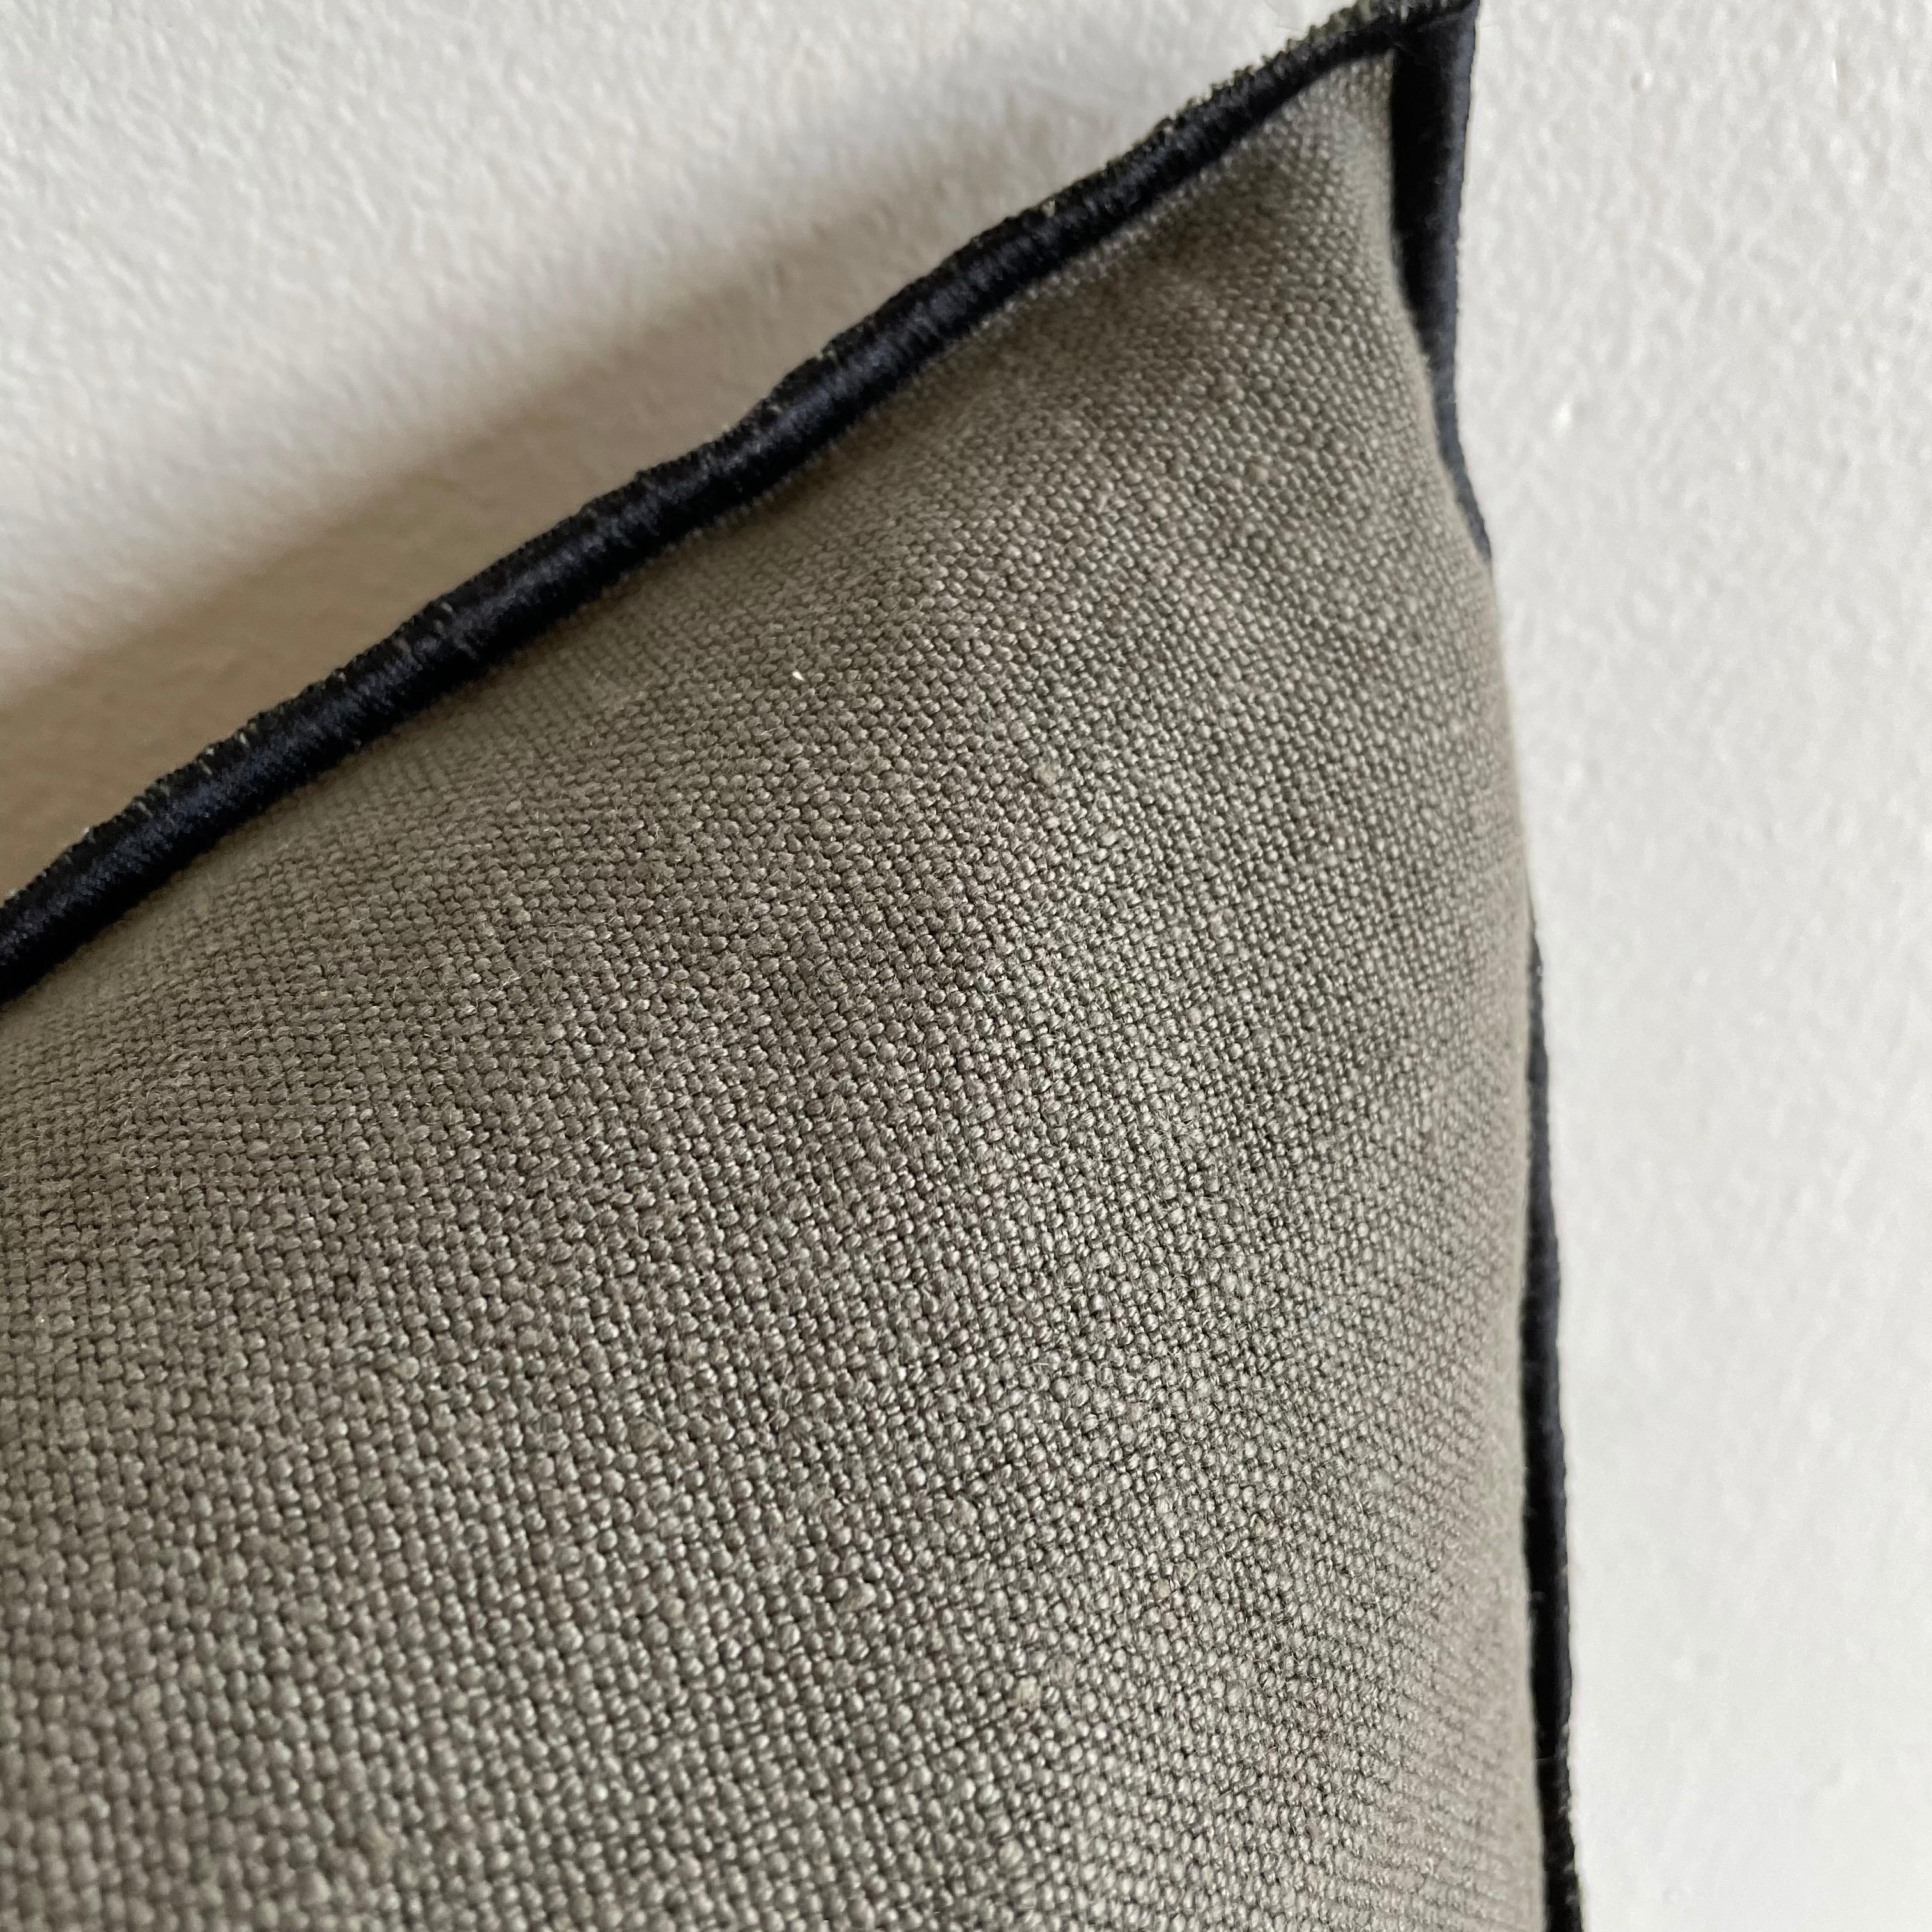 Custom linen blend accent pillow. Color: Crocodile A dark green / brown colored nubby textured style pillow with a stitched edge, metal zipper closure. Our pillows are constructed with vintage one of a kind textiles from around the globe. Carefully